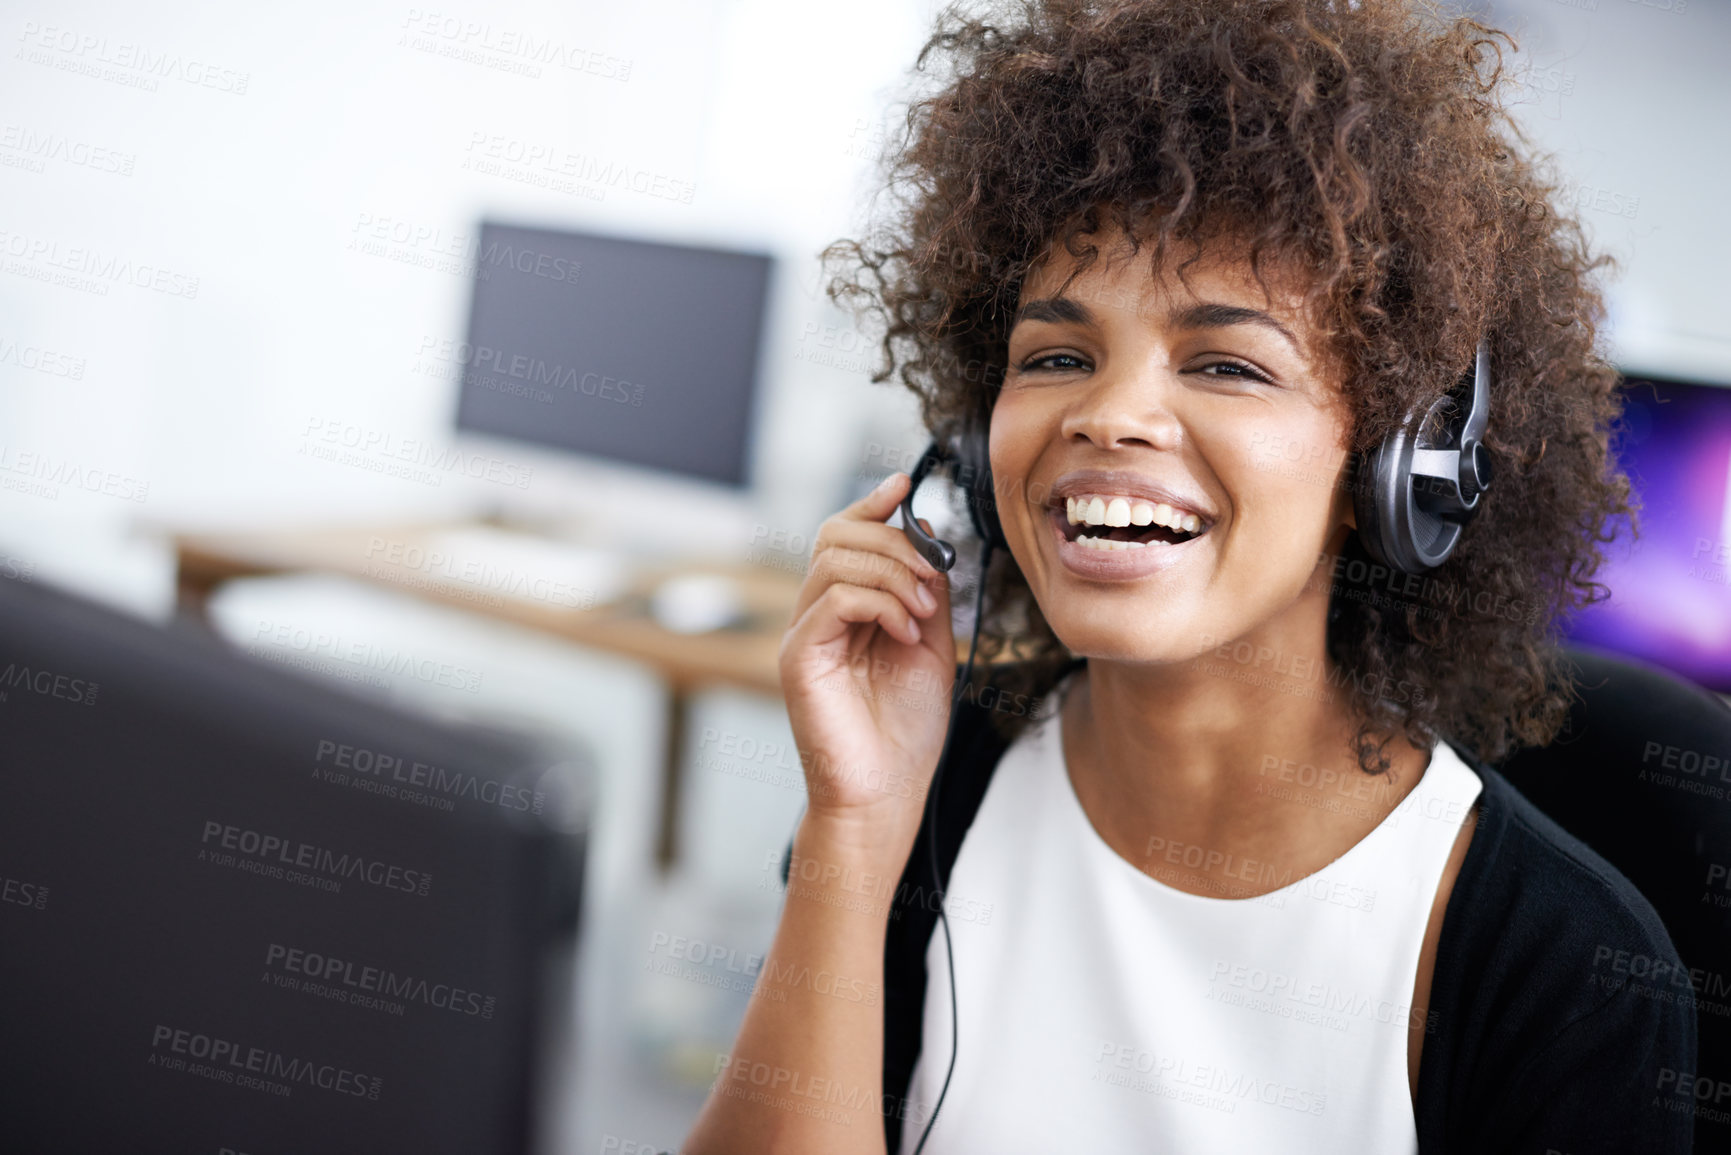 Buy stock photo Portrait of an attractive young female call center operator